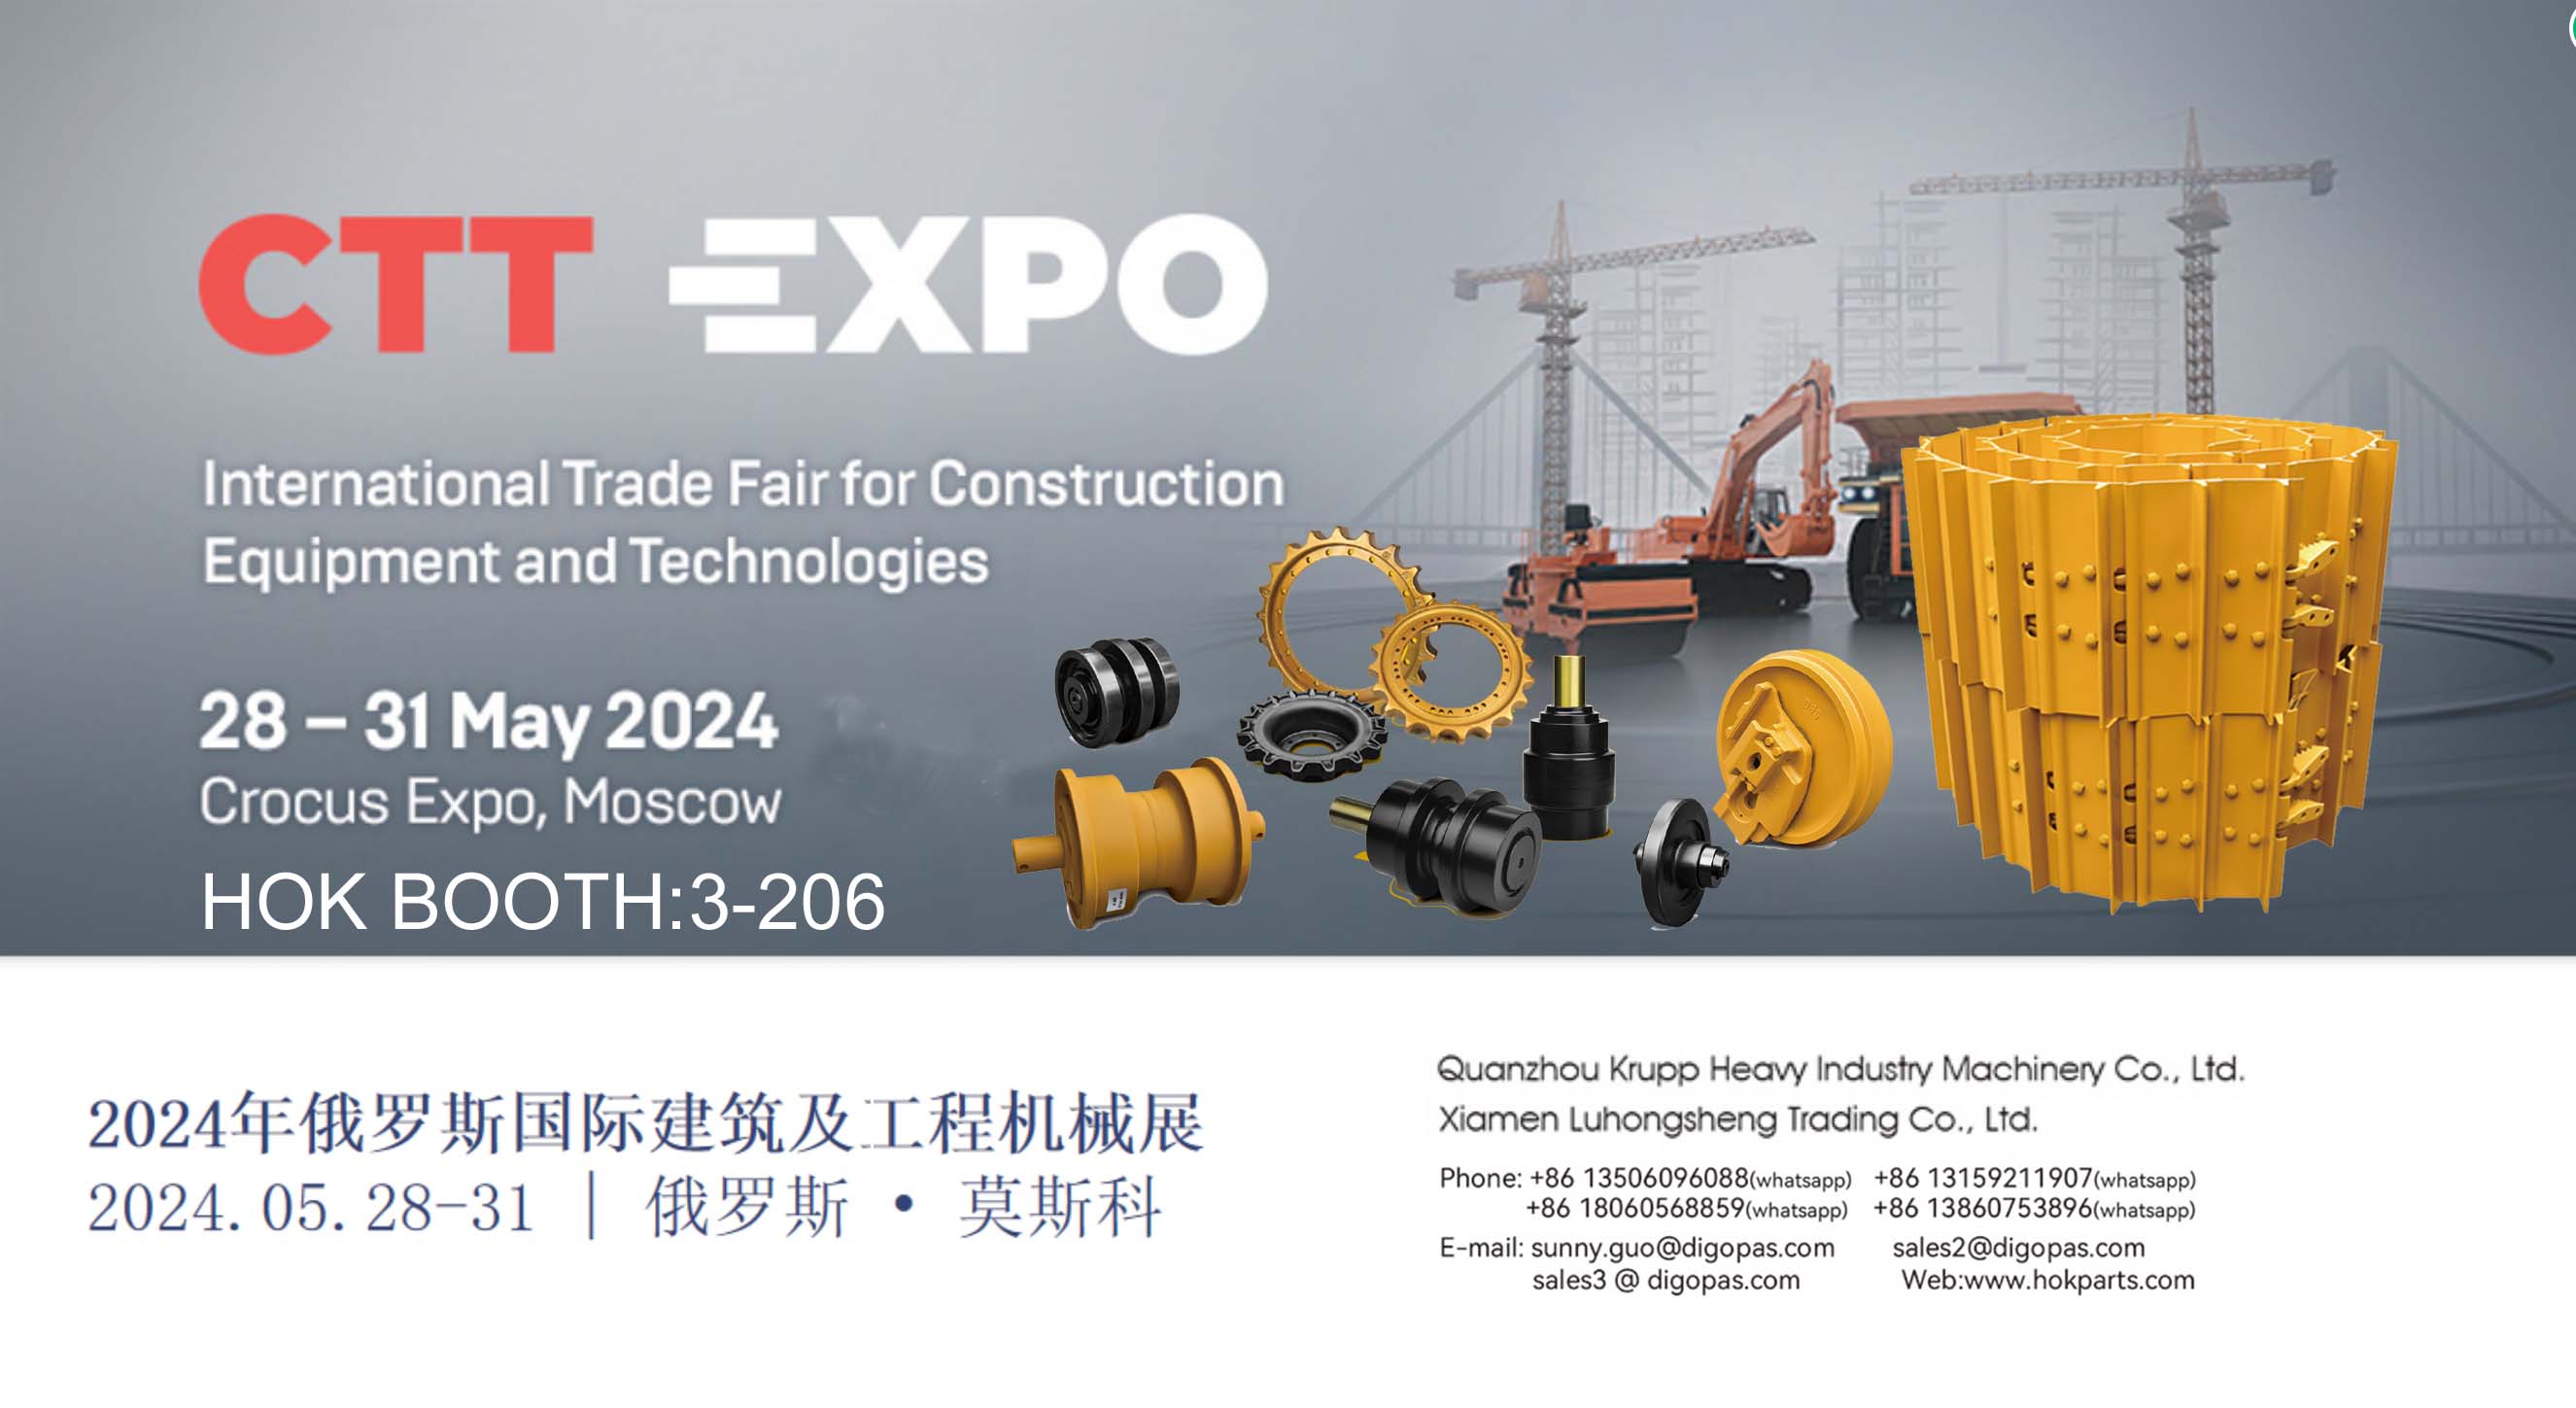 CTT EXPO May.28-31,2024 Meet at International Trade Fair for Construction Equipment and Technologies